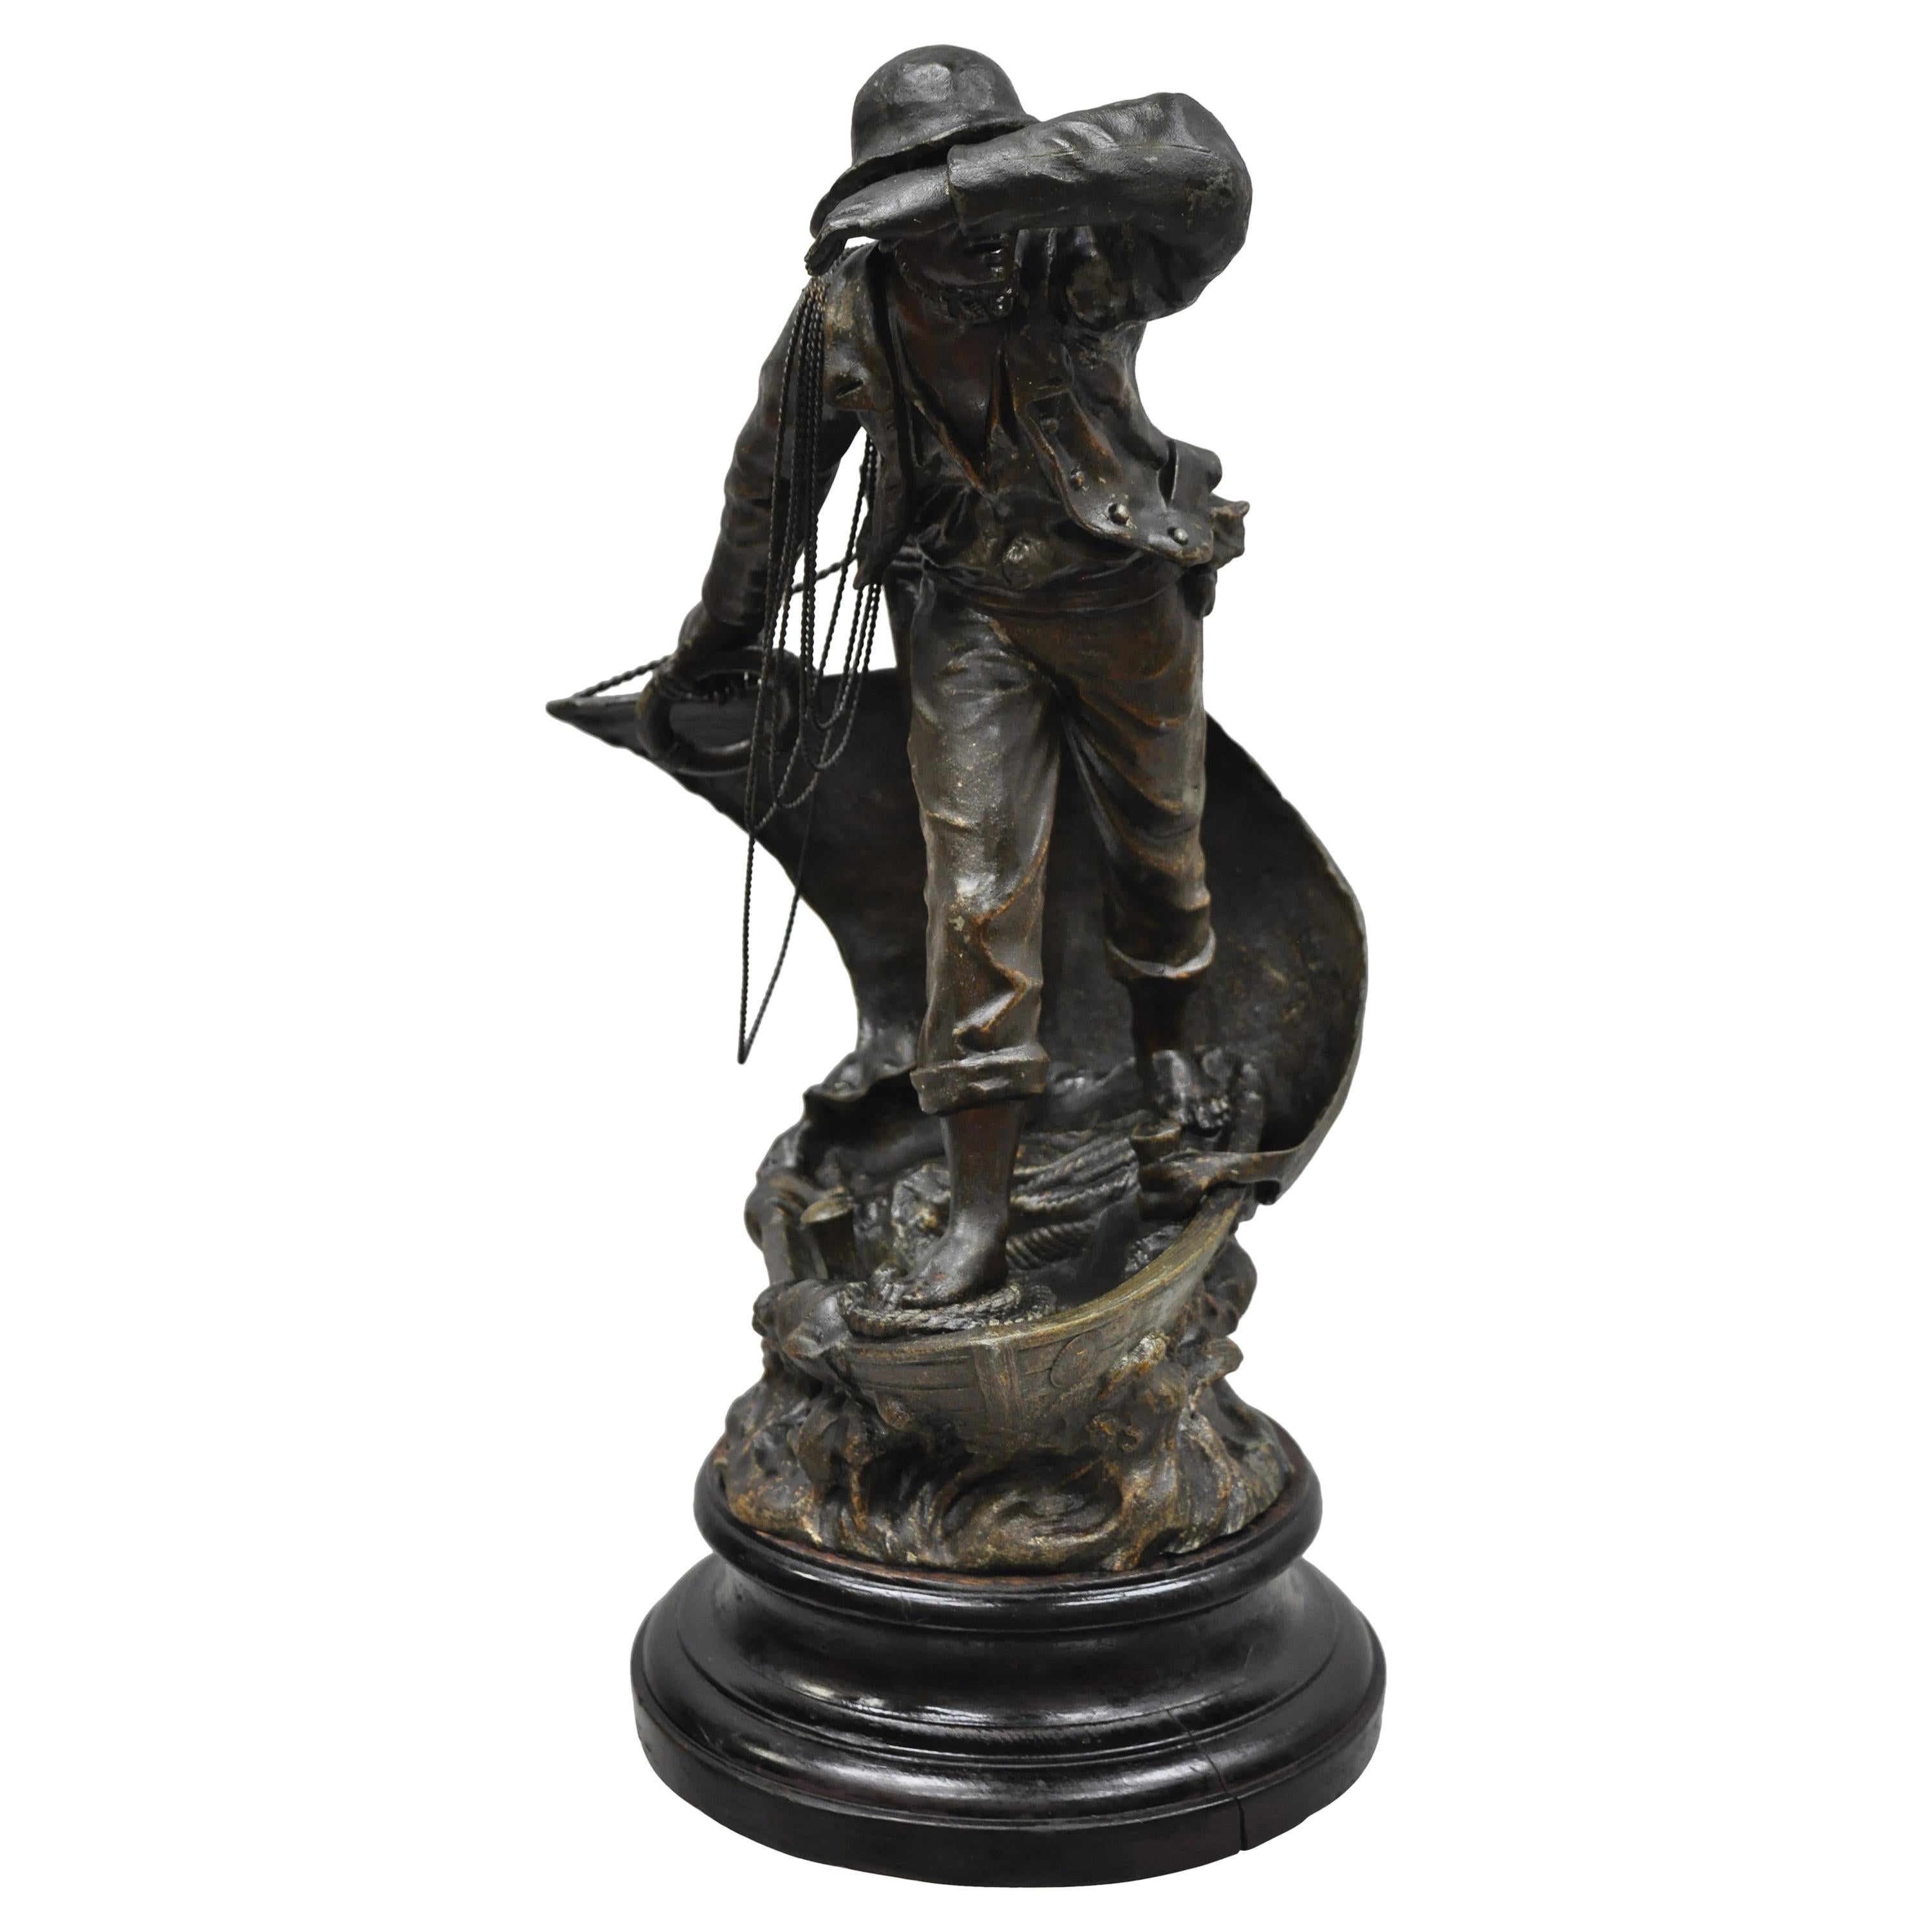 Antique French Spelter Metal Sailor Watchman on Ship Wooden Base, Made in France